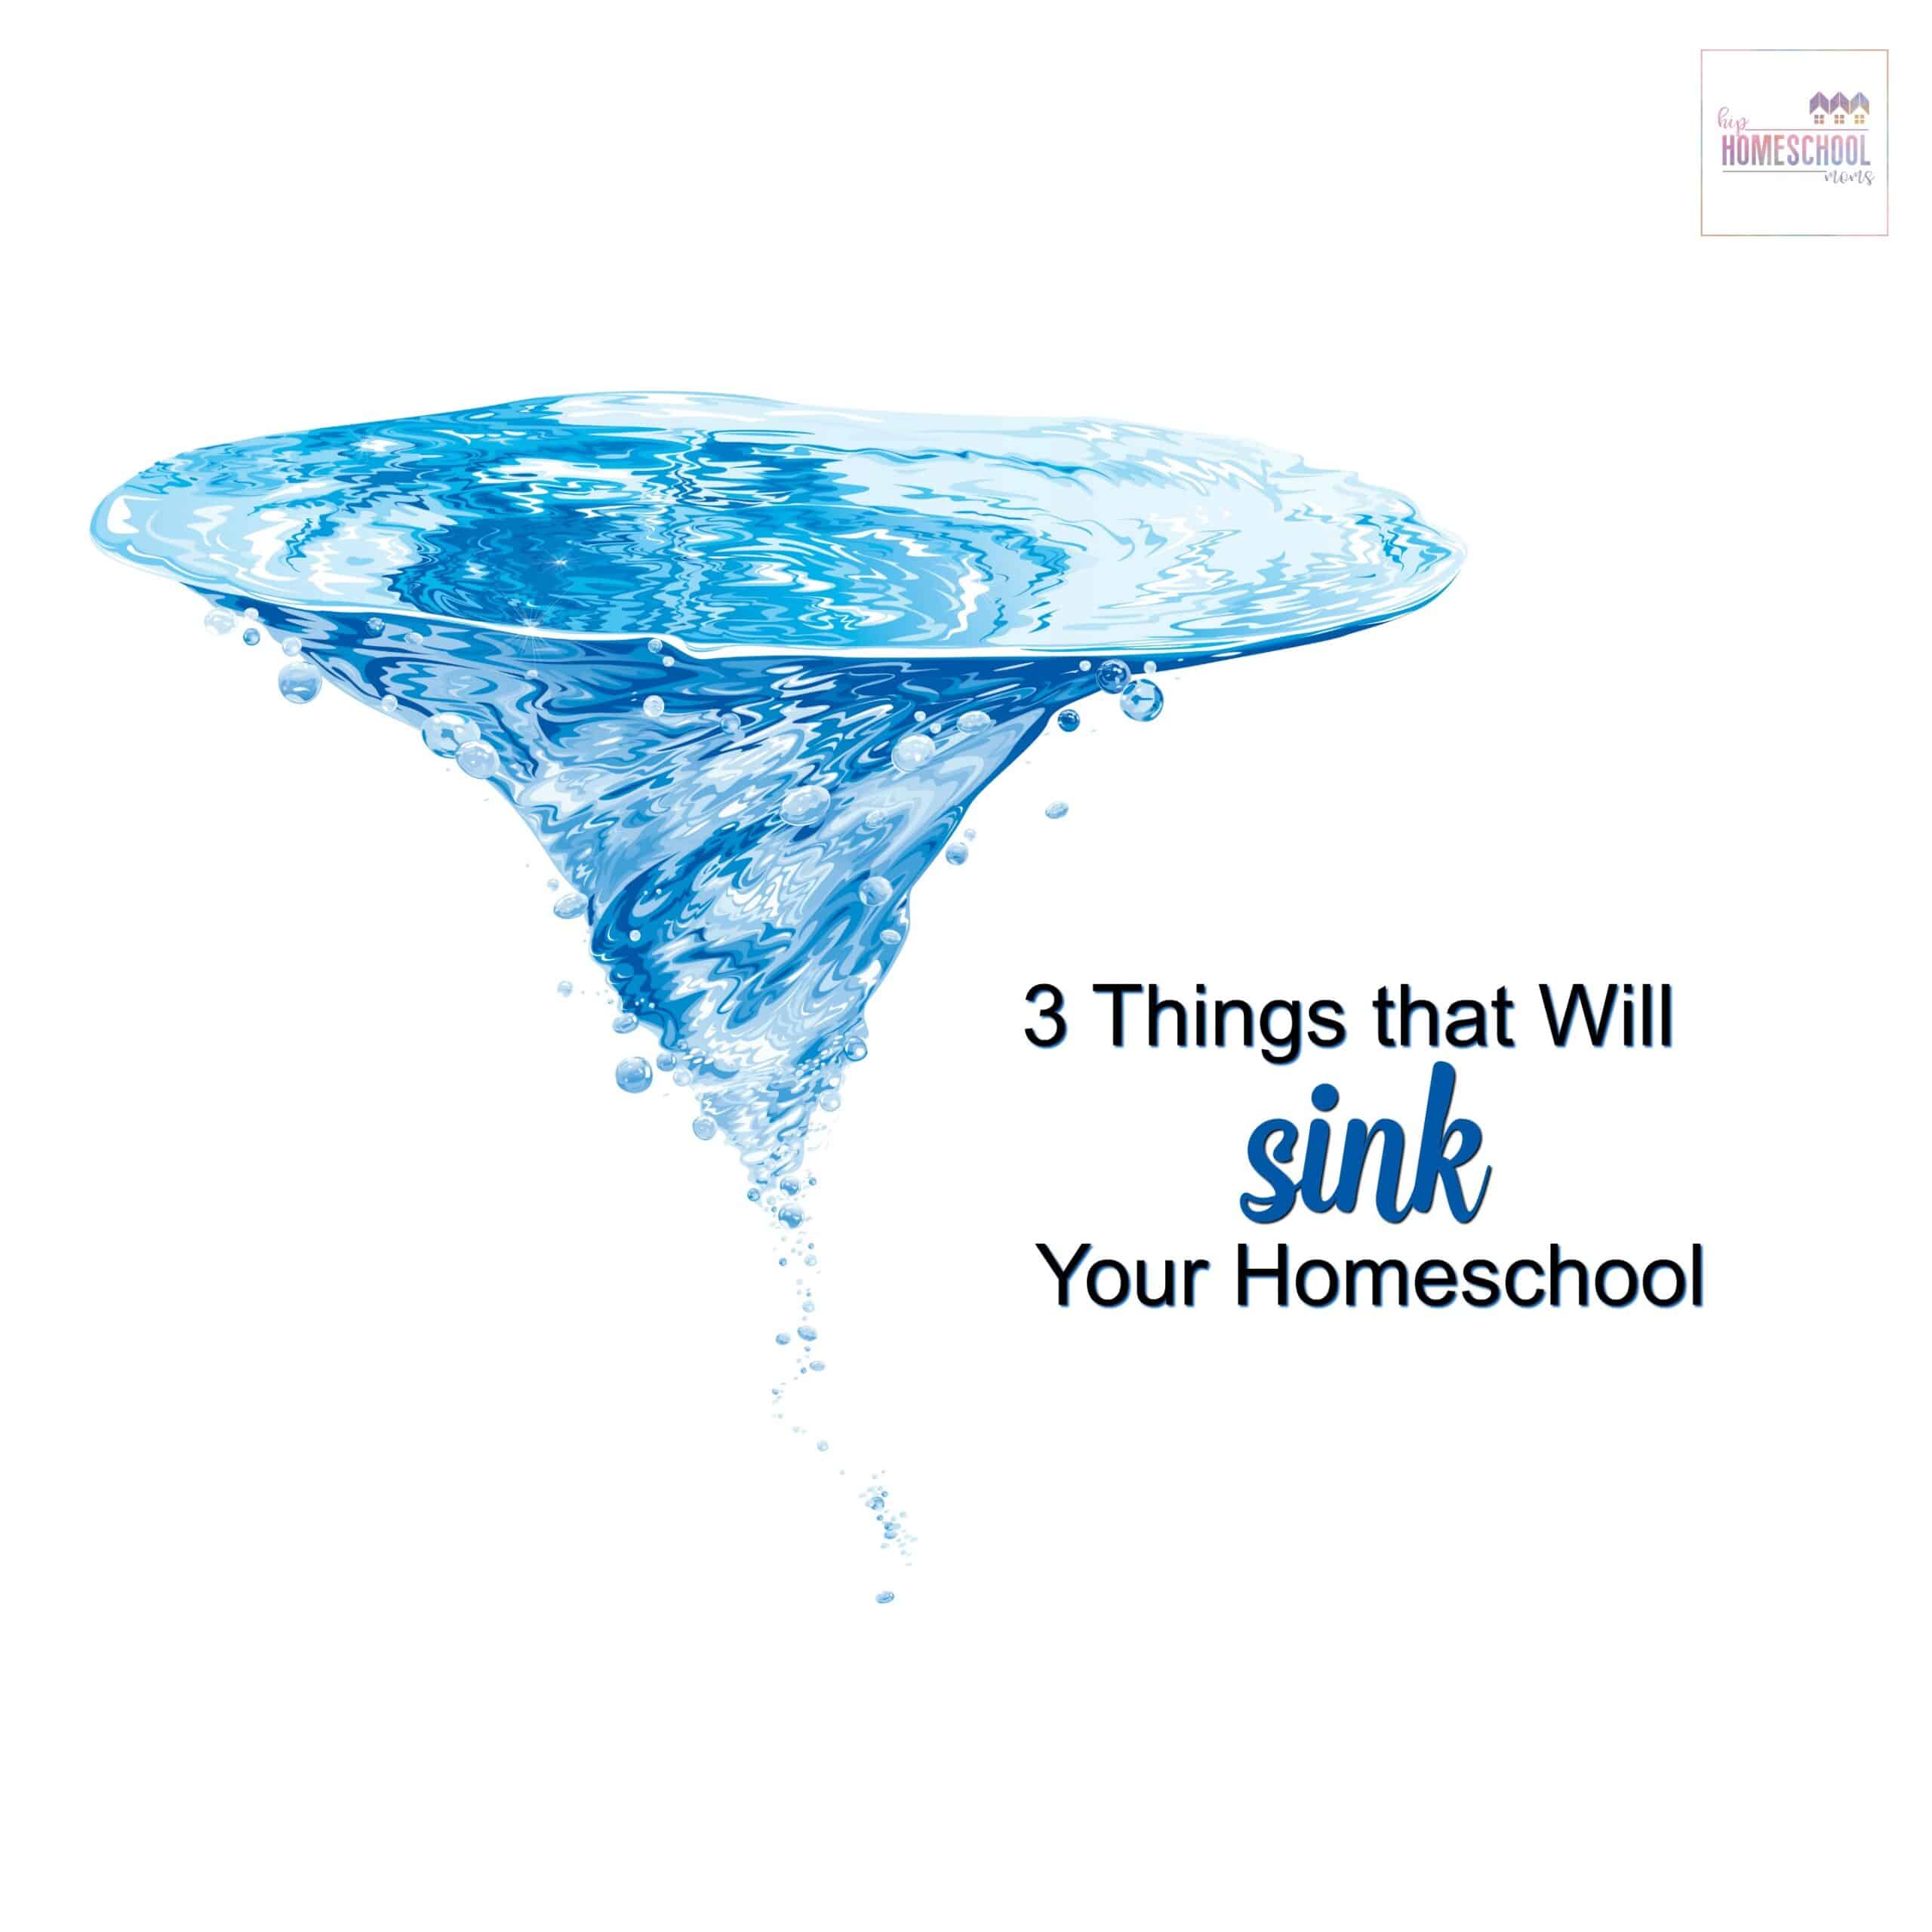 3 Things That Will Sink Your Homeschool